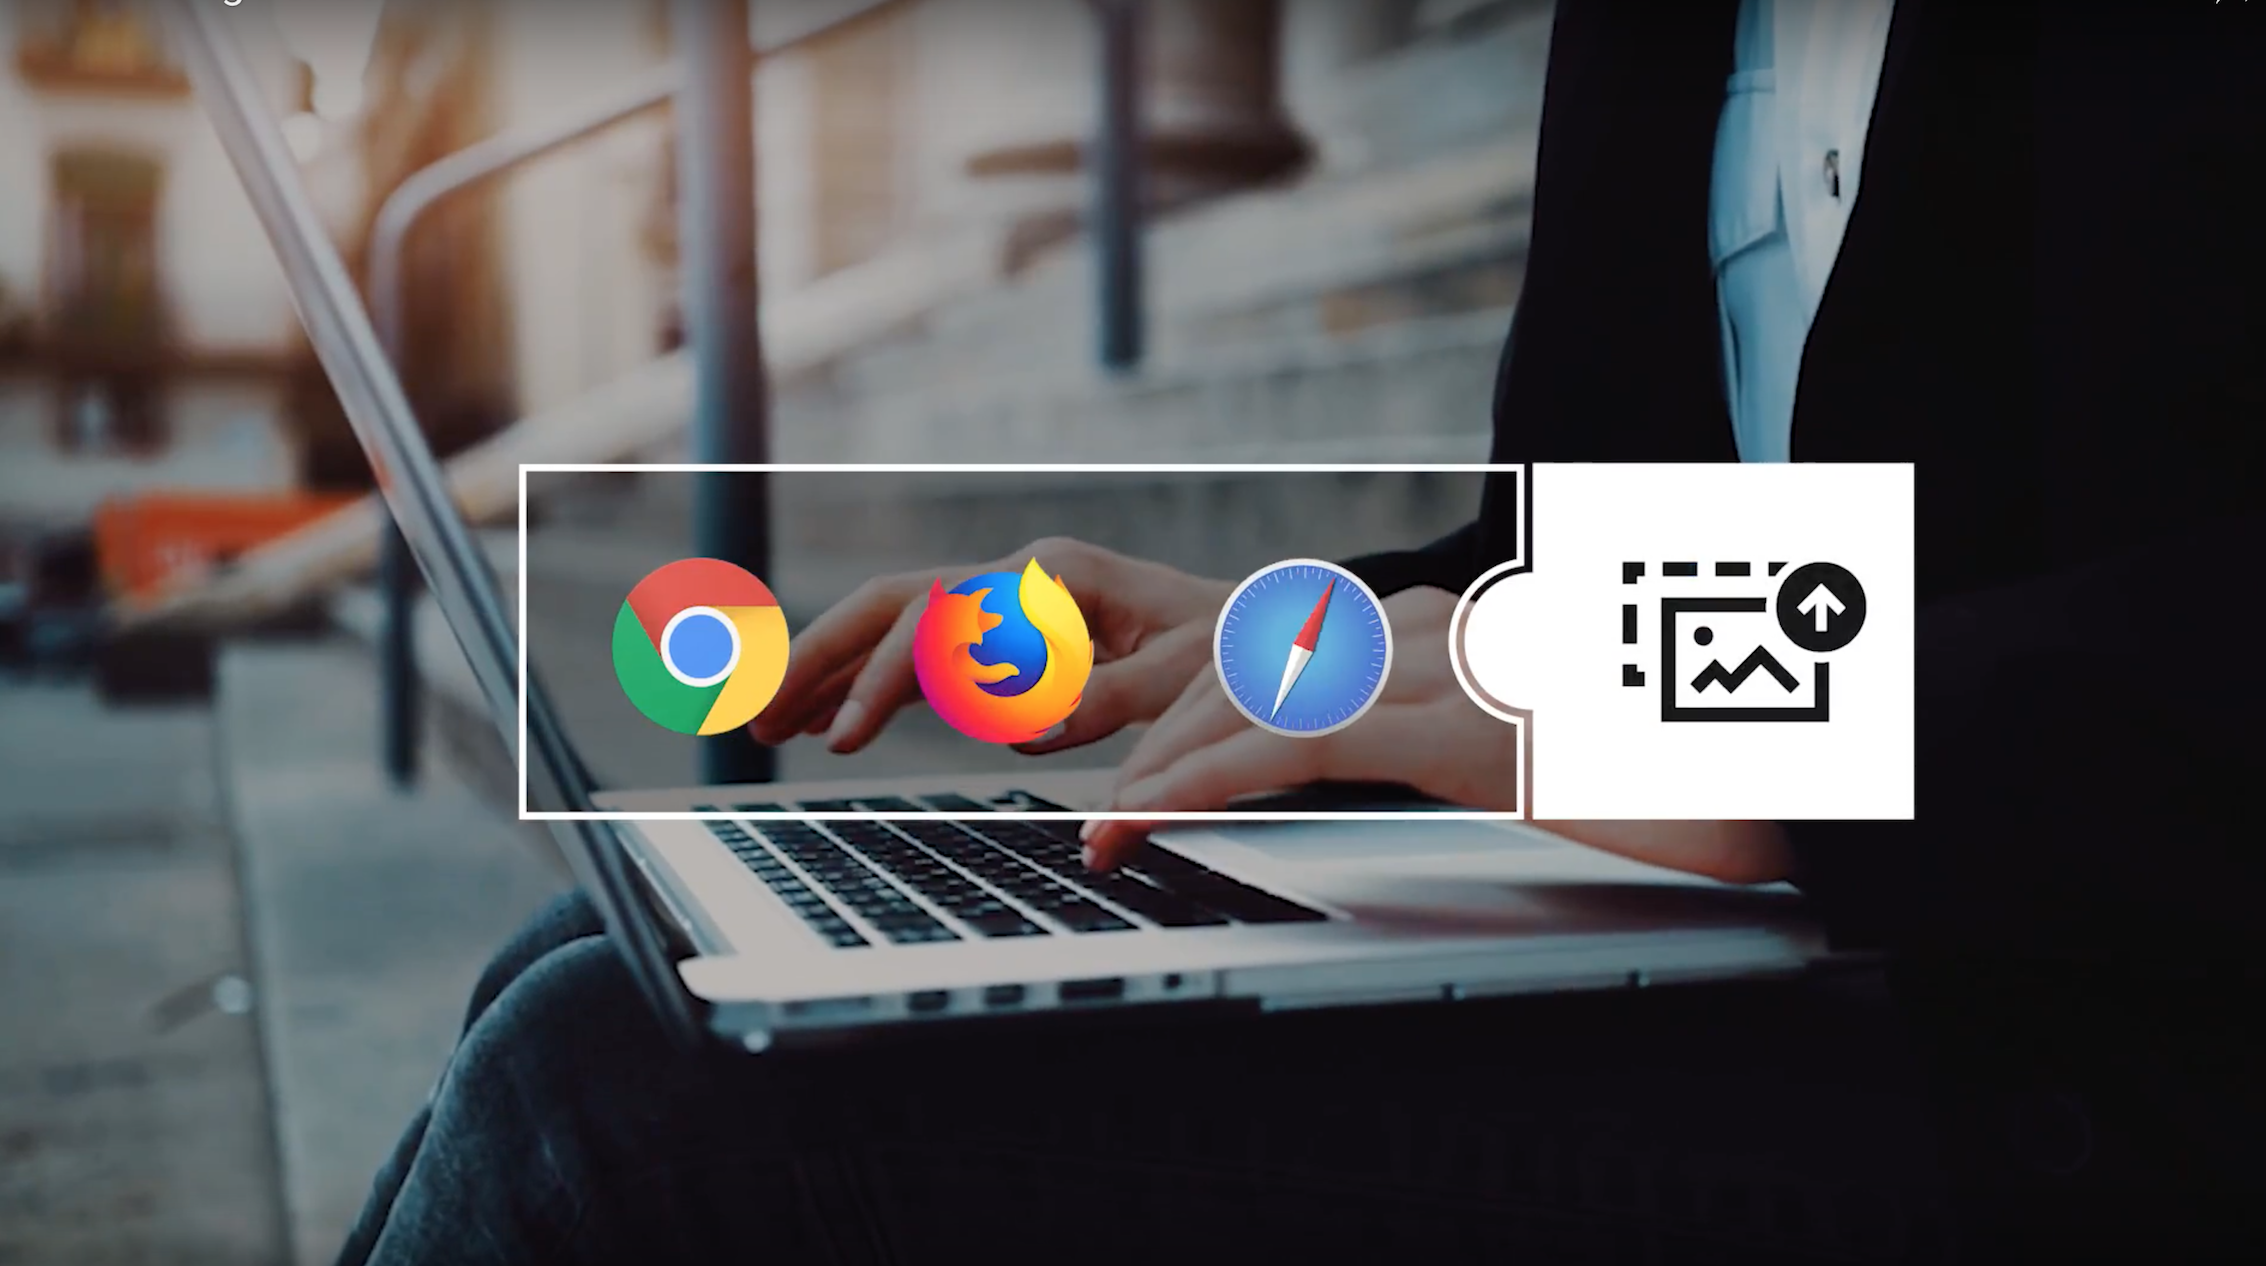 Browser extensions for Visual Search